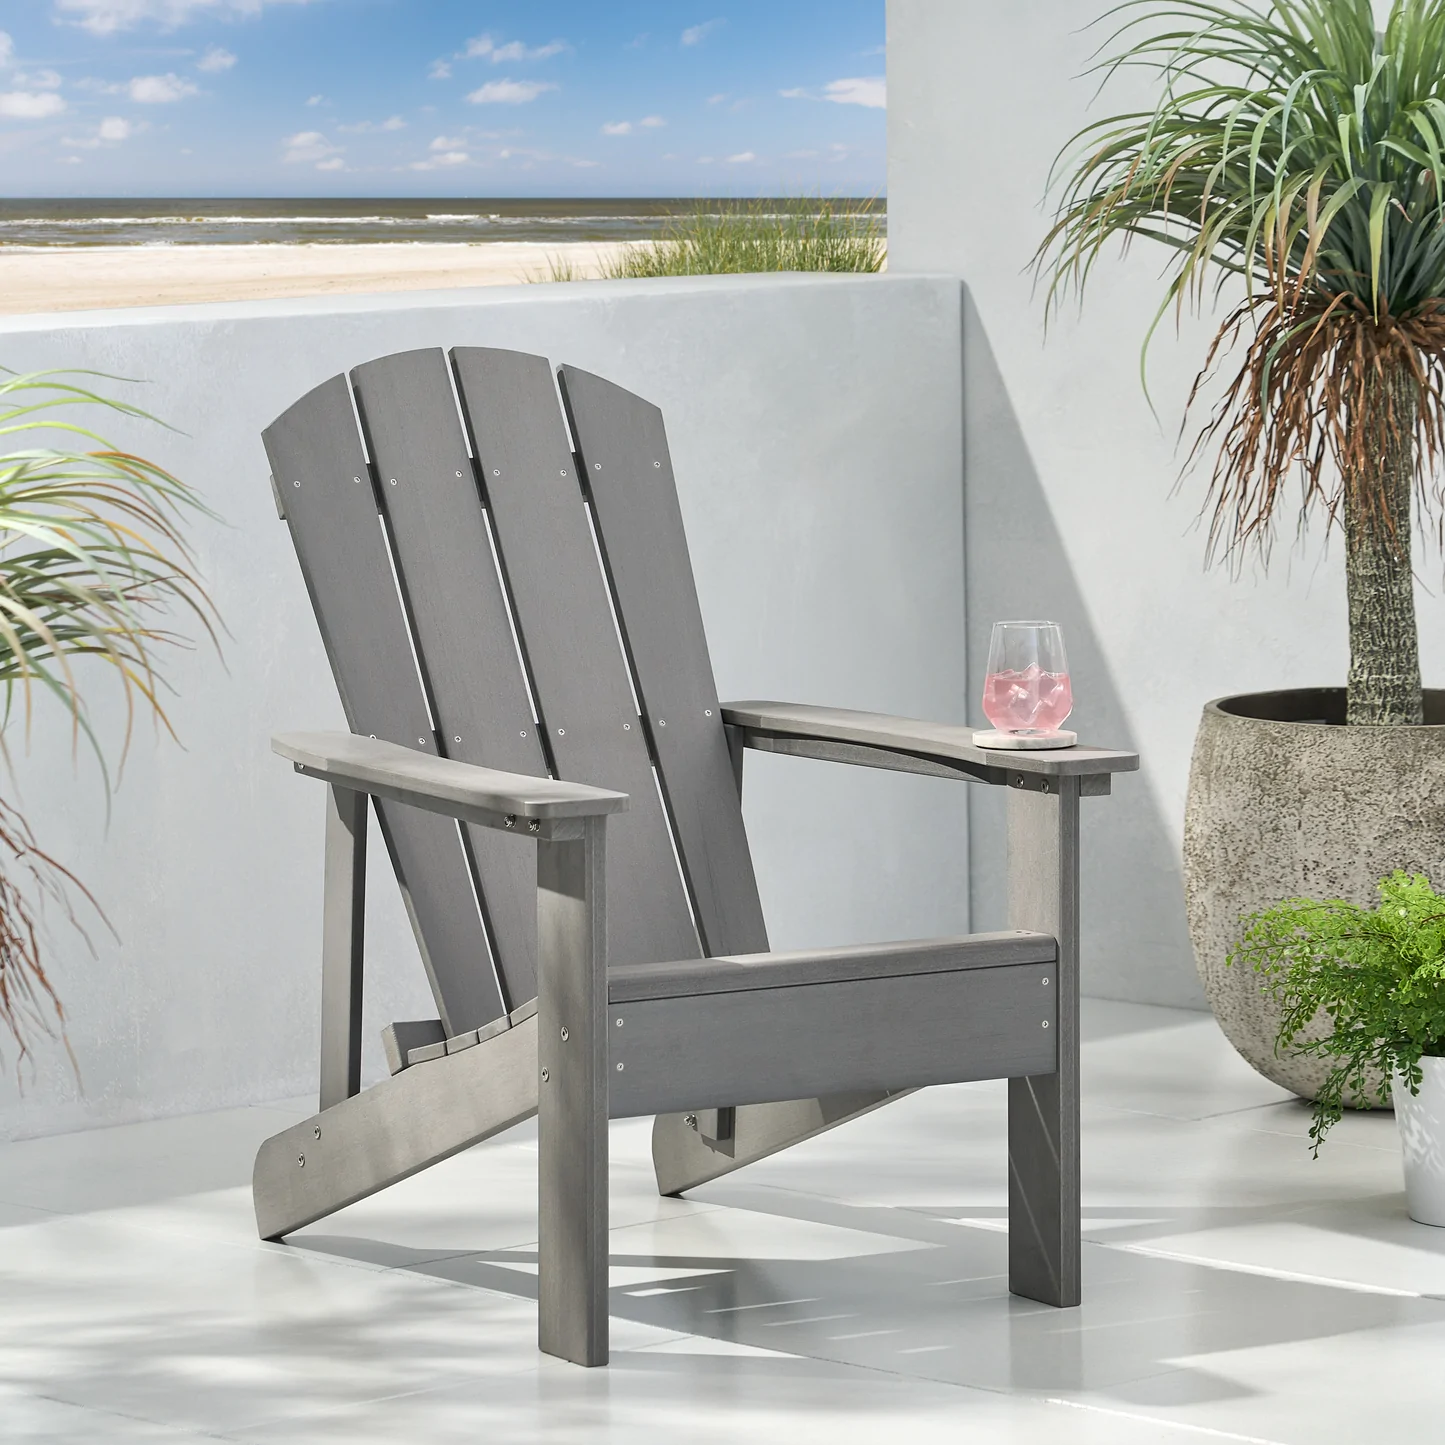 KUIKUI Classic Solid Gray Outdoor Solid Wood Adirondack Chair Garden Lounge Chair - image 1 of 8